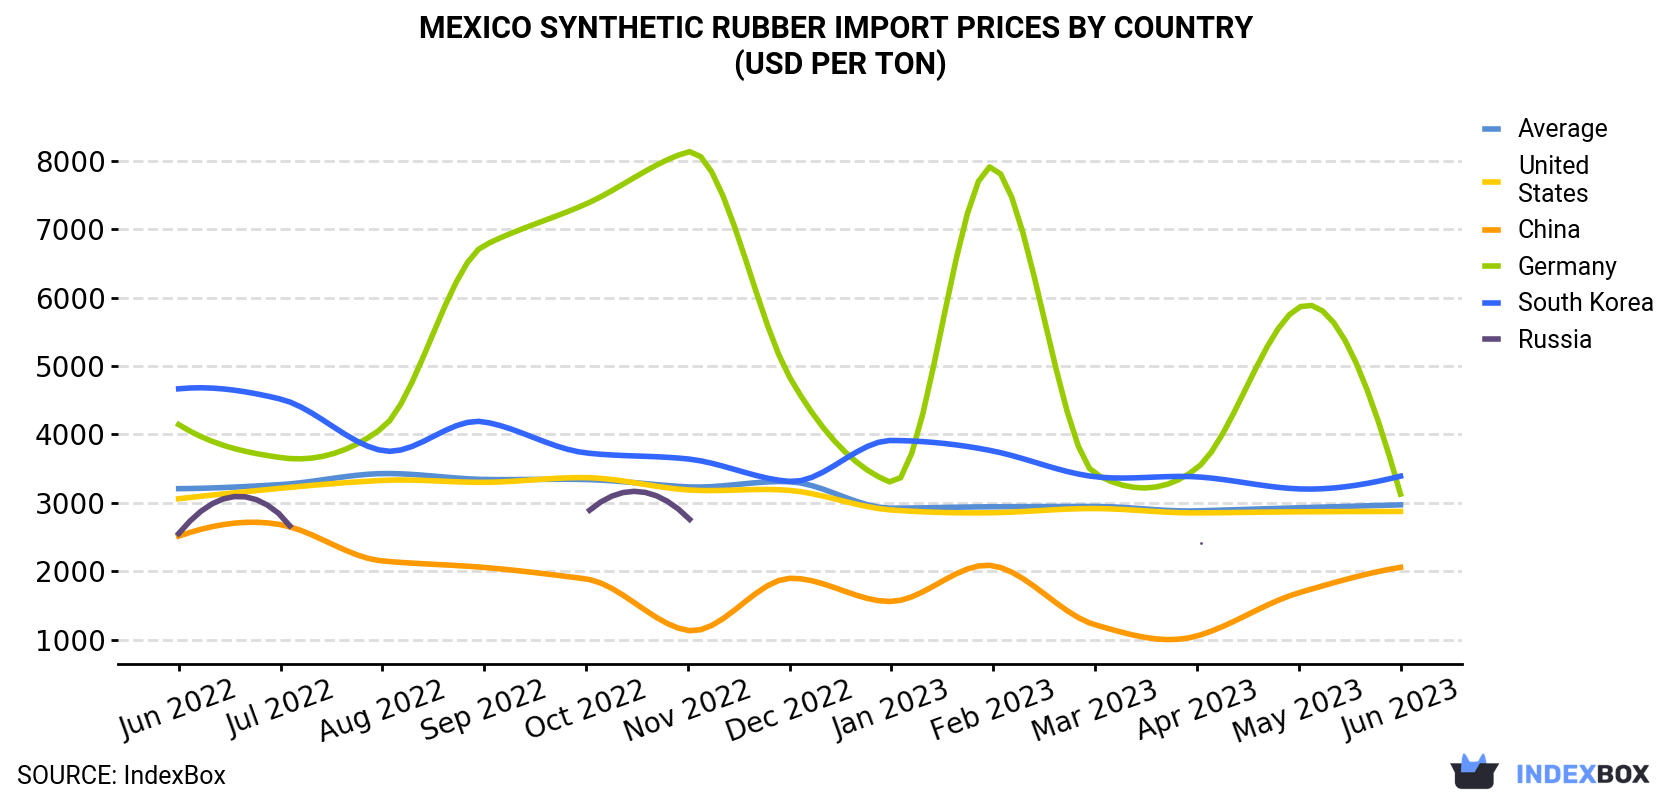 Mexico Synthetic Rubber Import Prices By Country (USD Per Ton)